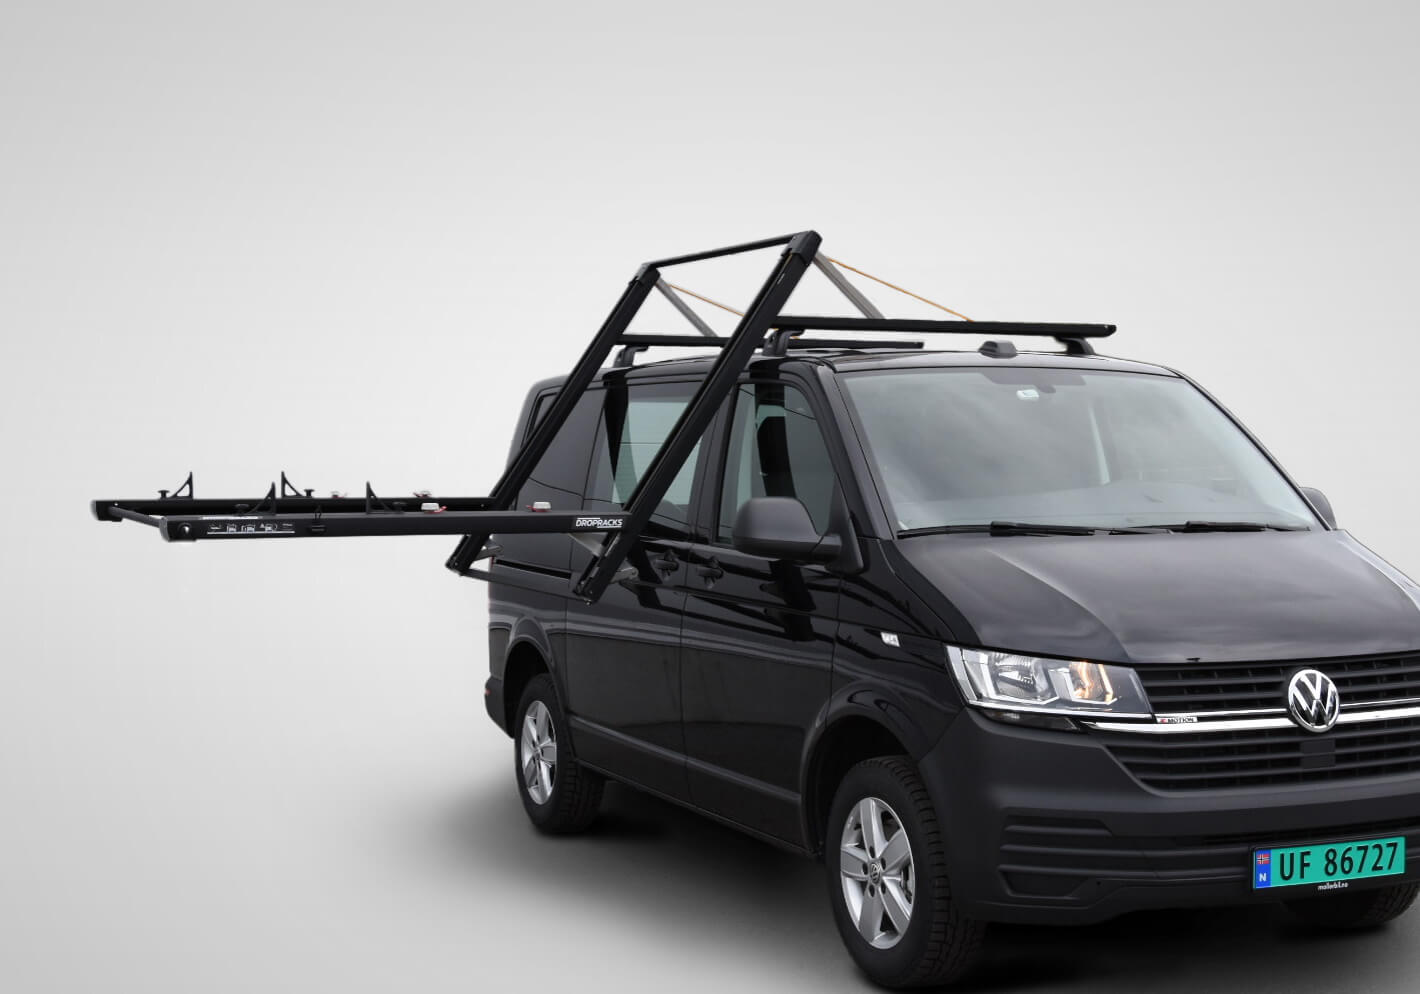 Volkswagen VW Crafter L1 (SWB) H2 (high roof) (2006 to 2017):Dropracks XL roof loading system (vehicle roof connectors at extra cost)